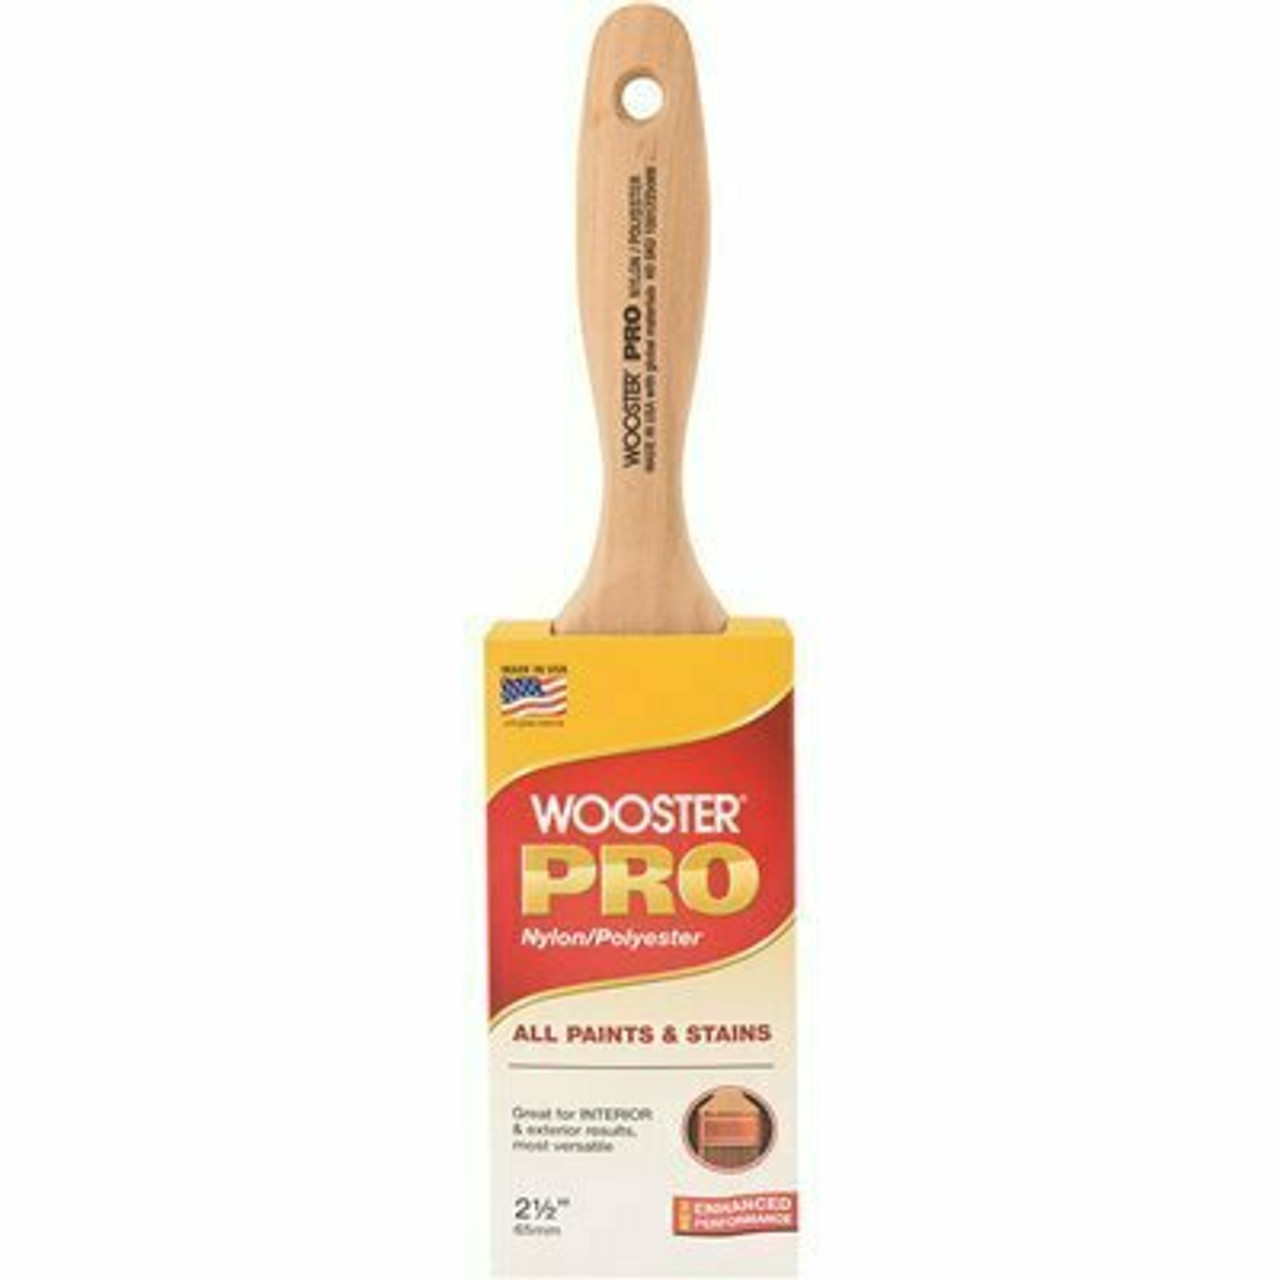 Wooster 2-1/2 In. Pro Nylon/Polyester Flat Brush